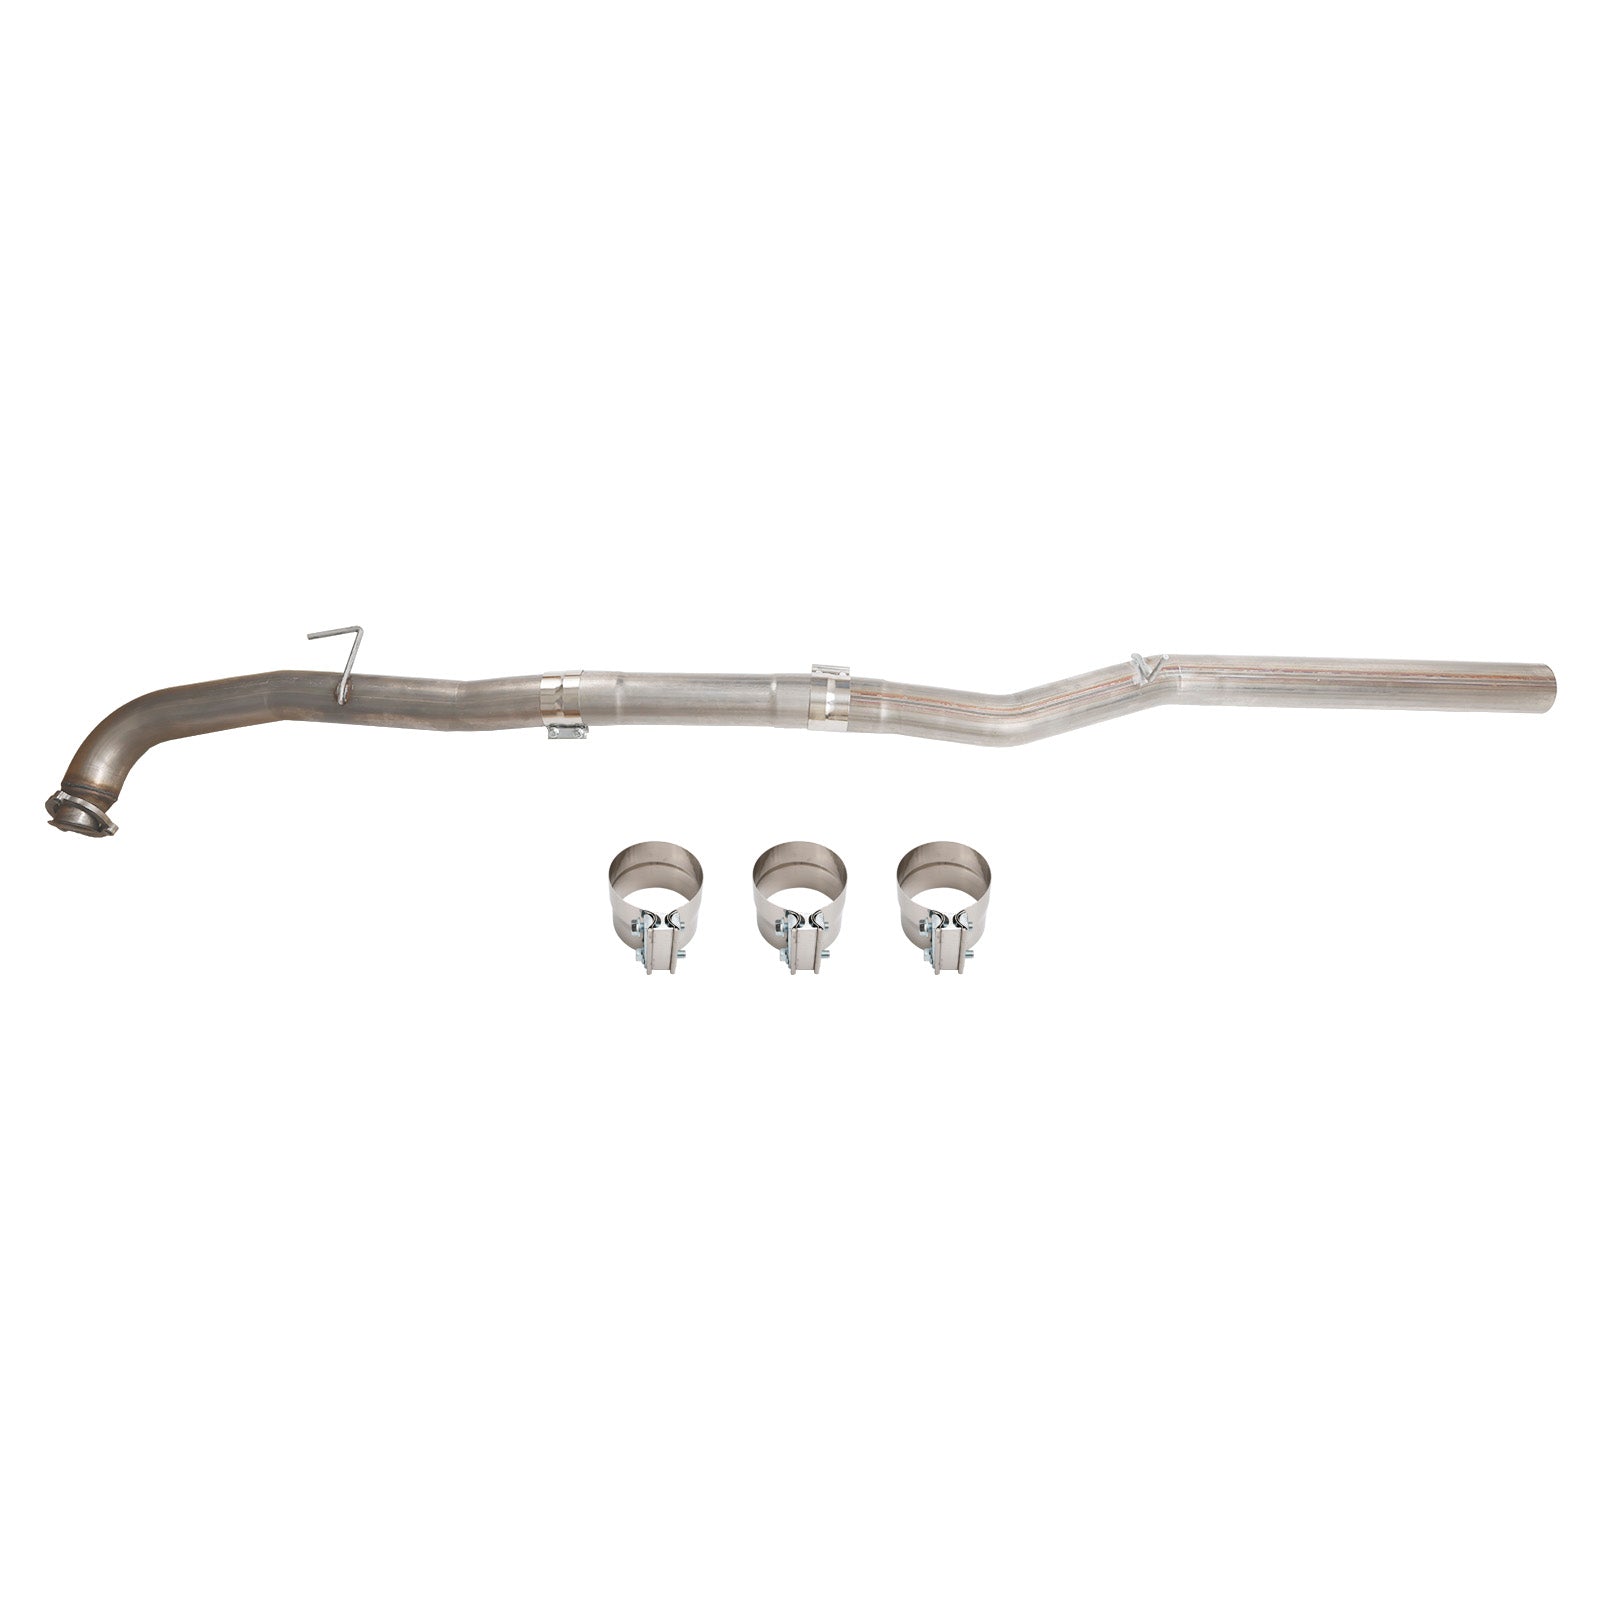 Chevy GMC 2015.5-2016 LML 6.6 Duramax Stainless Steel 4" Exhaust DPF Delete Race Pipe